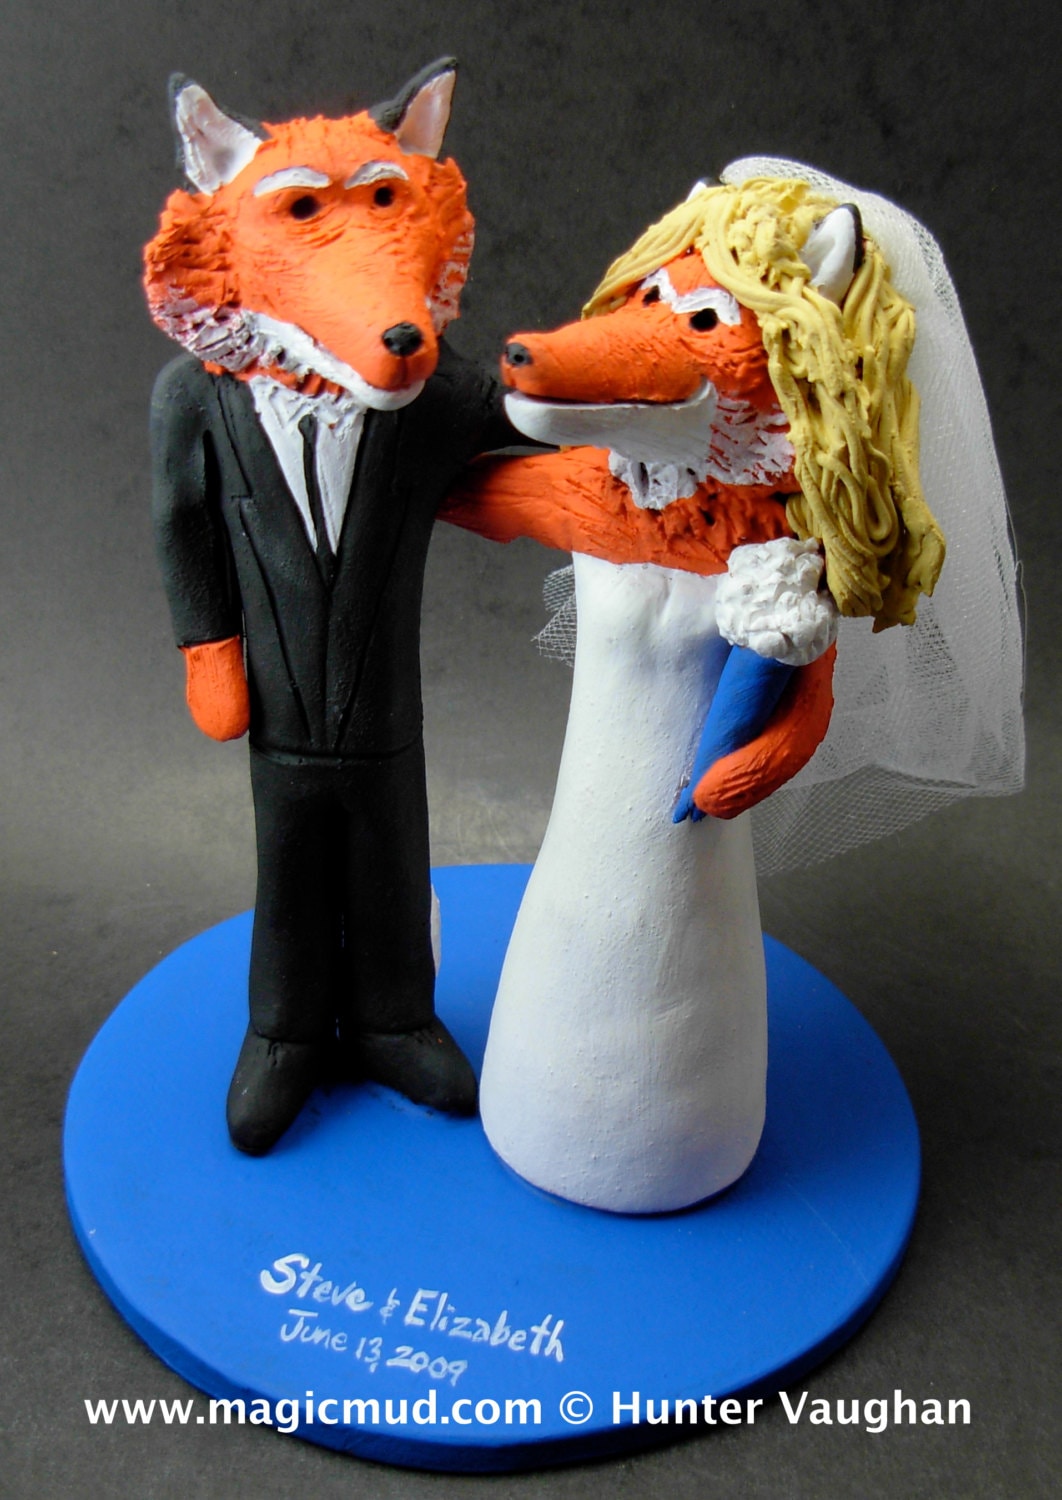 Foxes Animal Wedding Cake Topper, Fox Bride and Groom Wedding Cake Topper, Wedding Cake Topper custom made for any animal, fox Cake Topper